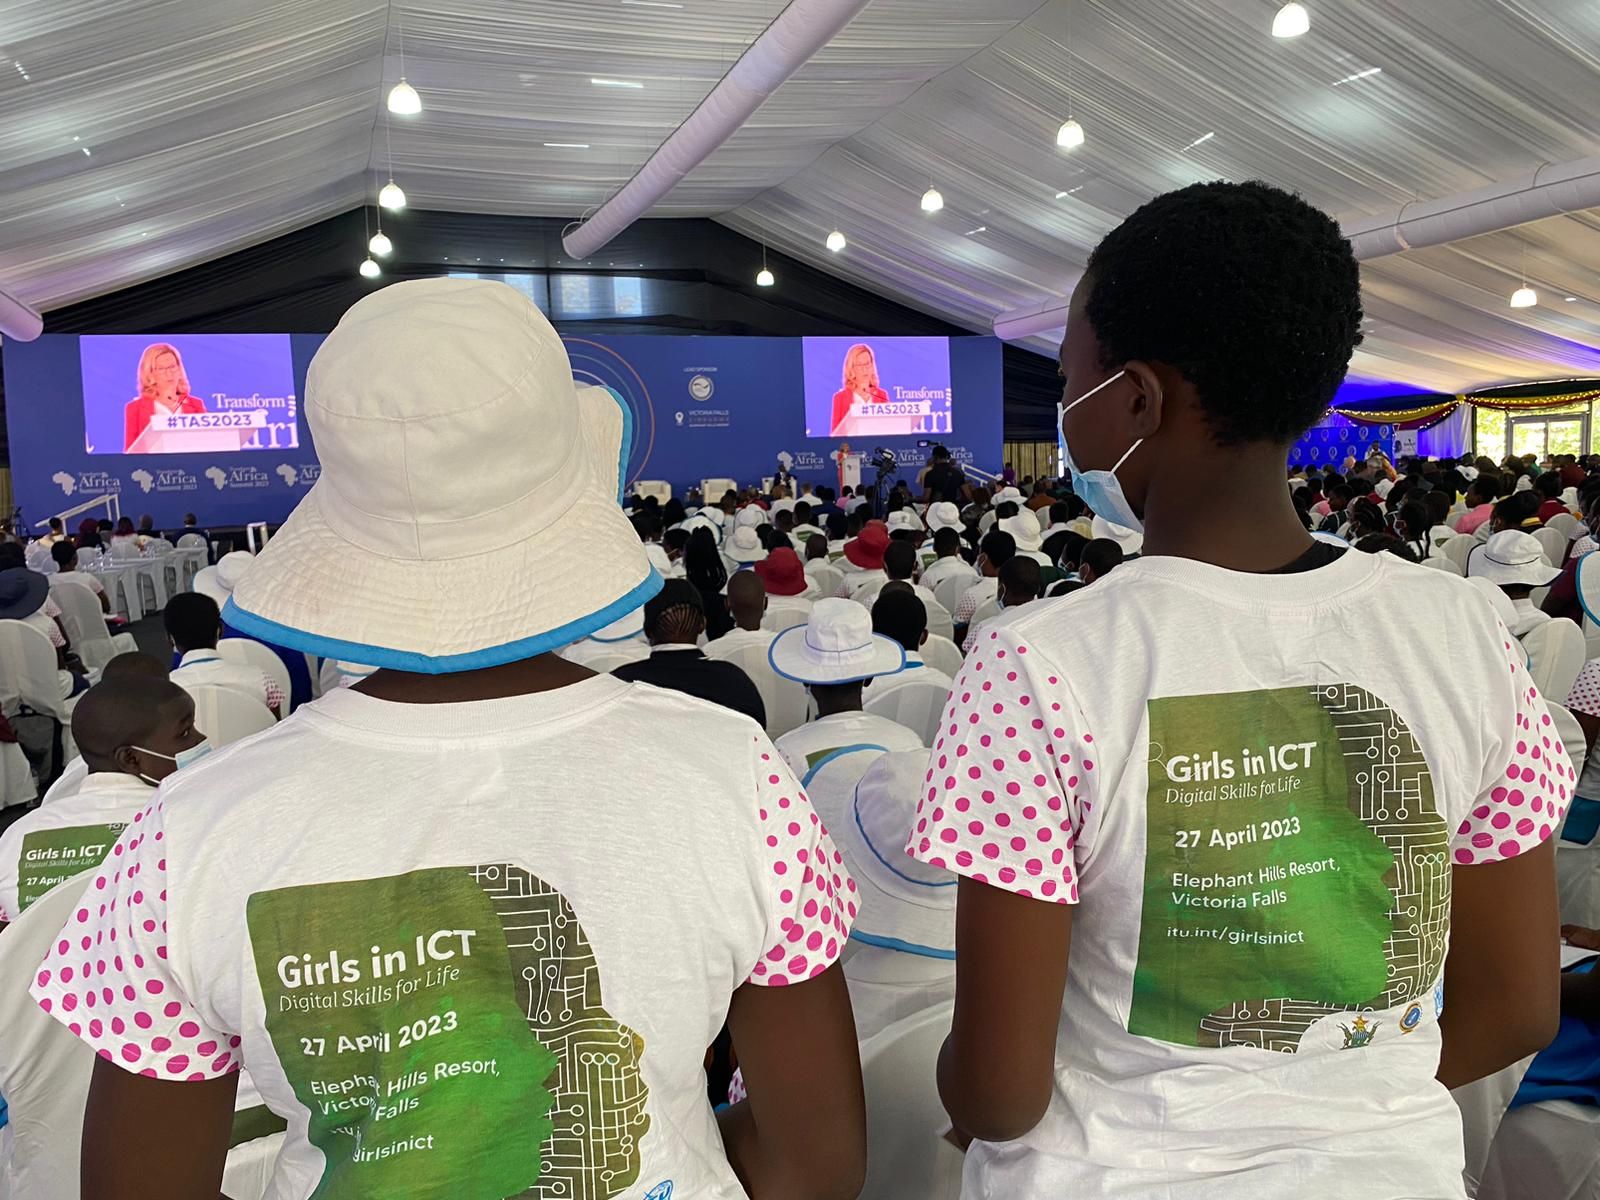 Girls in ICT: Digital skills can change lives featured image